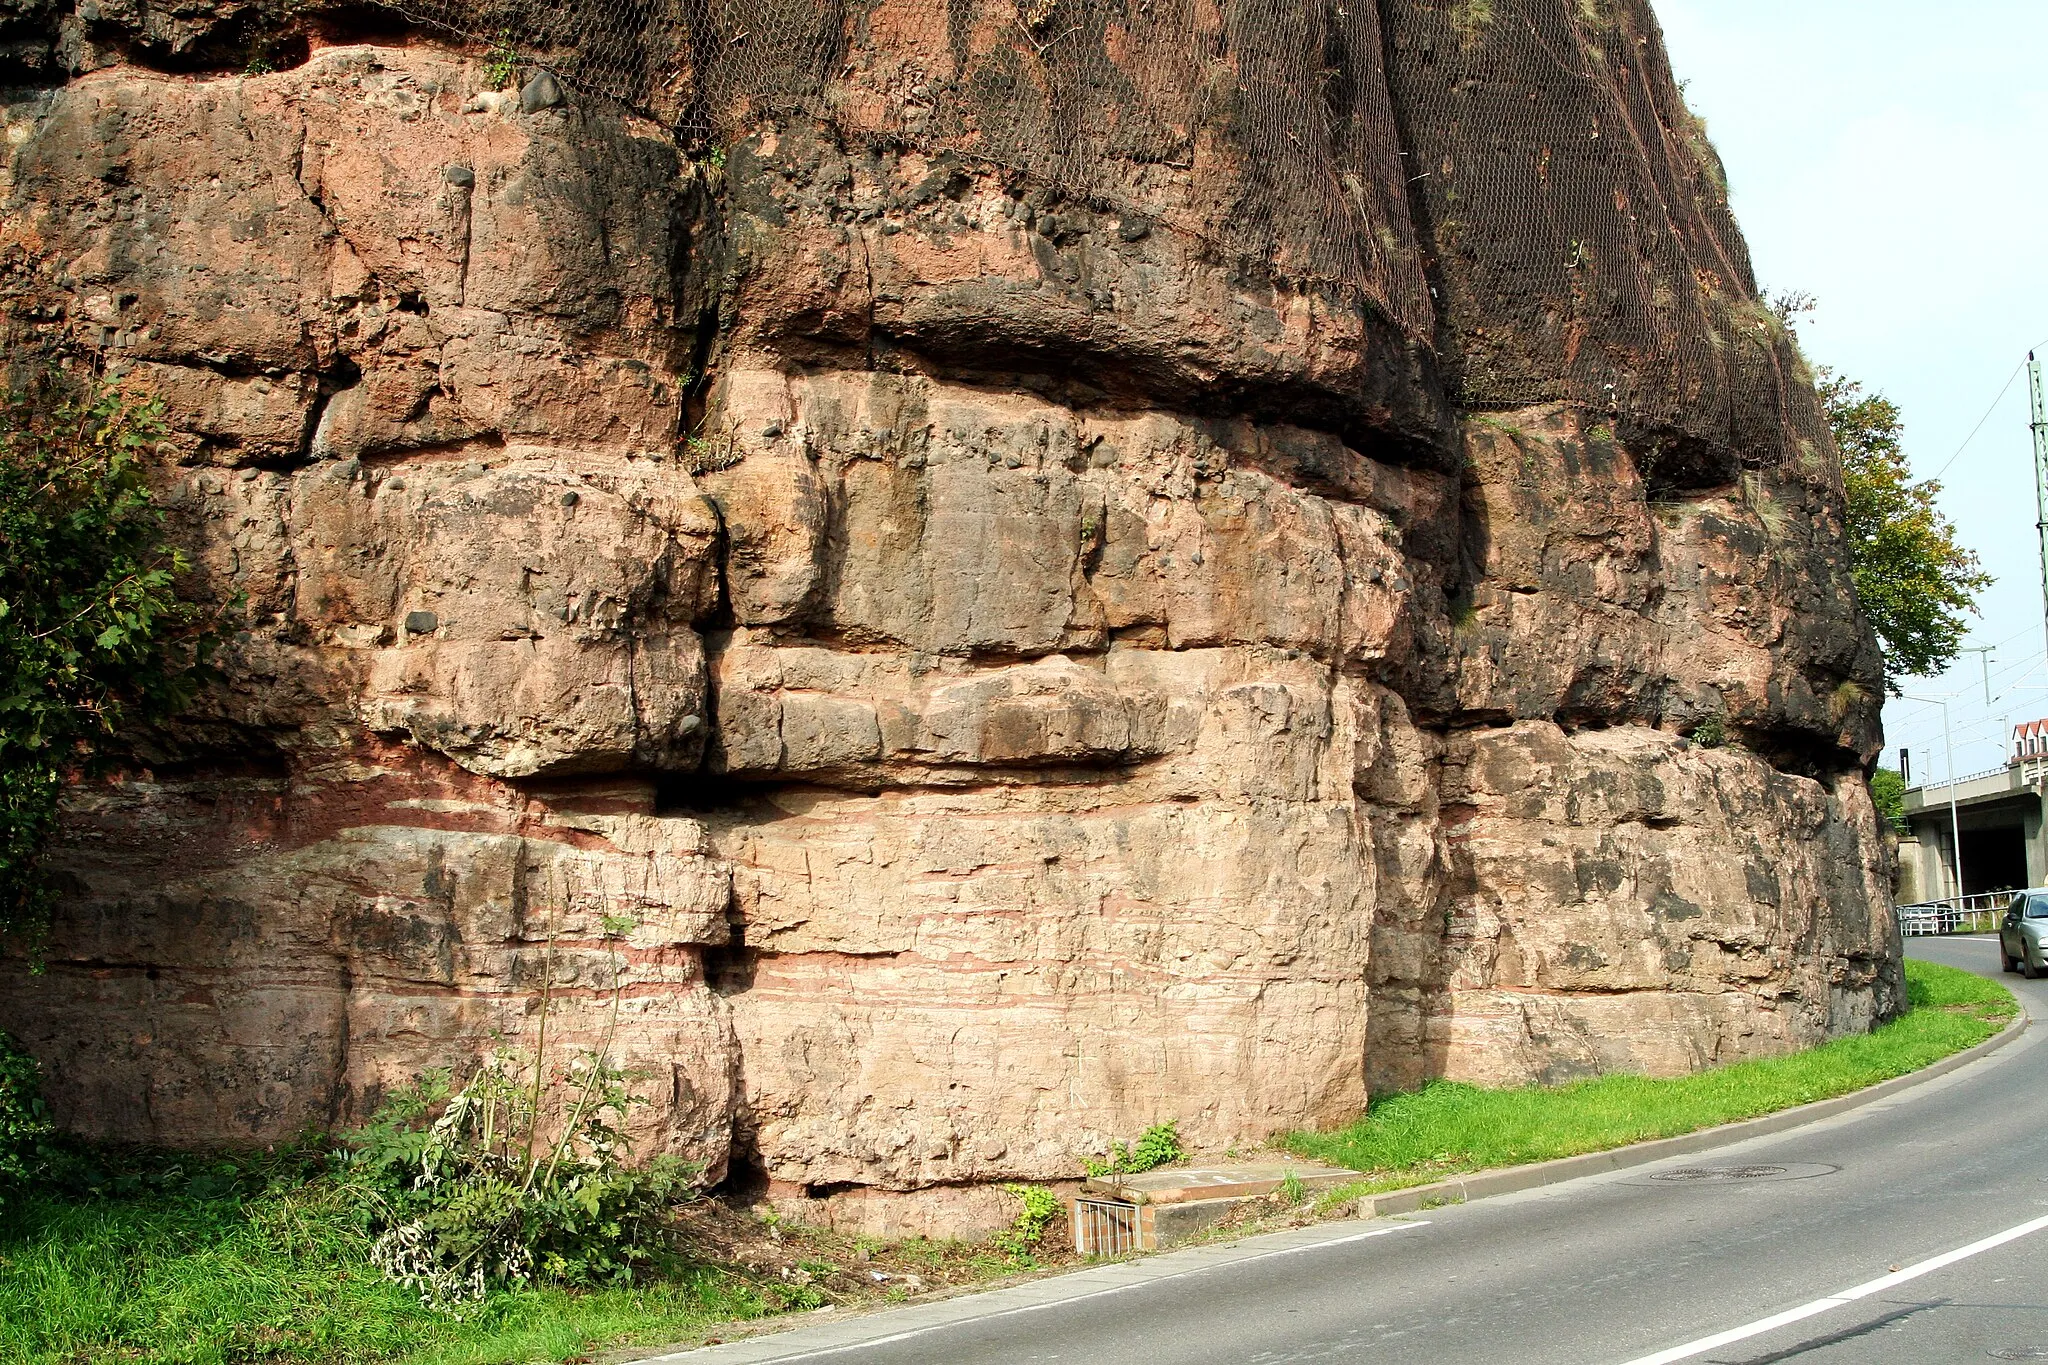 Photo showing: Detail of the Backofen-Felsen (“Baker’s Oven Rock”) at the south-western rim of the town of Freiberg (Saxony, Germany), Döhlen Basin, Bannewitz Formation (Rotliegend series, Lower Permian), showing relatively fine-grained and thinly bedded arcotic sandstones in the lower part of the image. The name of the locality refers to the elongated cave-like features in the rock face which are resulting from the outweathering of less resistant portions of the rock.